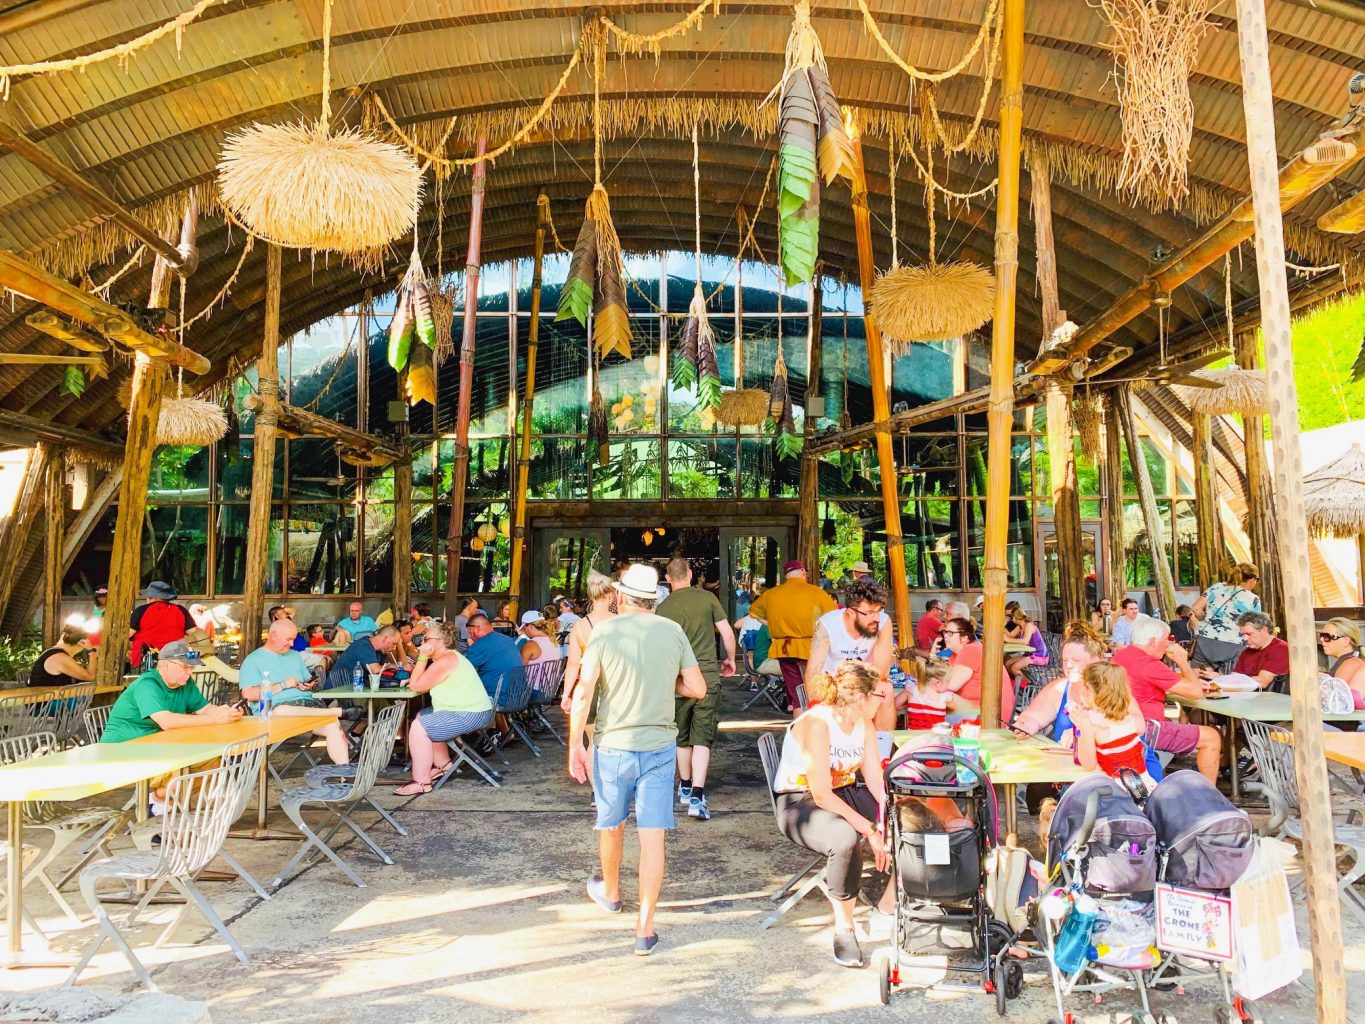 In this rustic, grassy outdoor seating area, people flock to eat veggie friendly options and be engrossed in the world of Pandora. Satu'li Canteen  is one of the best animal kingdom restaurants around! 